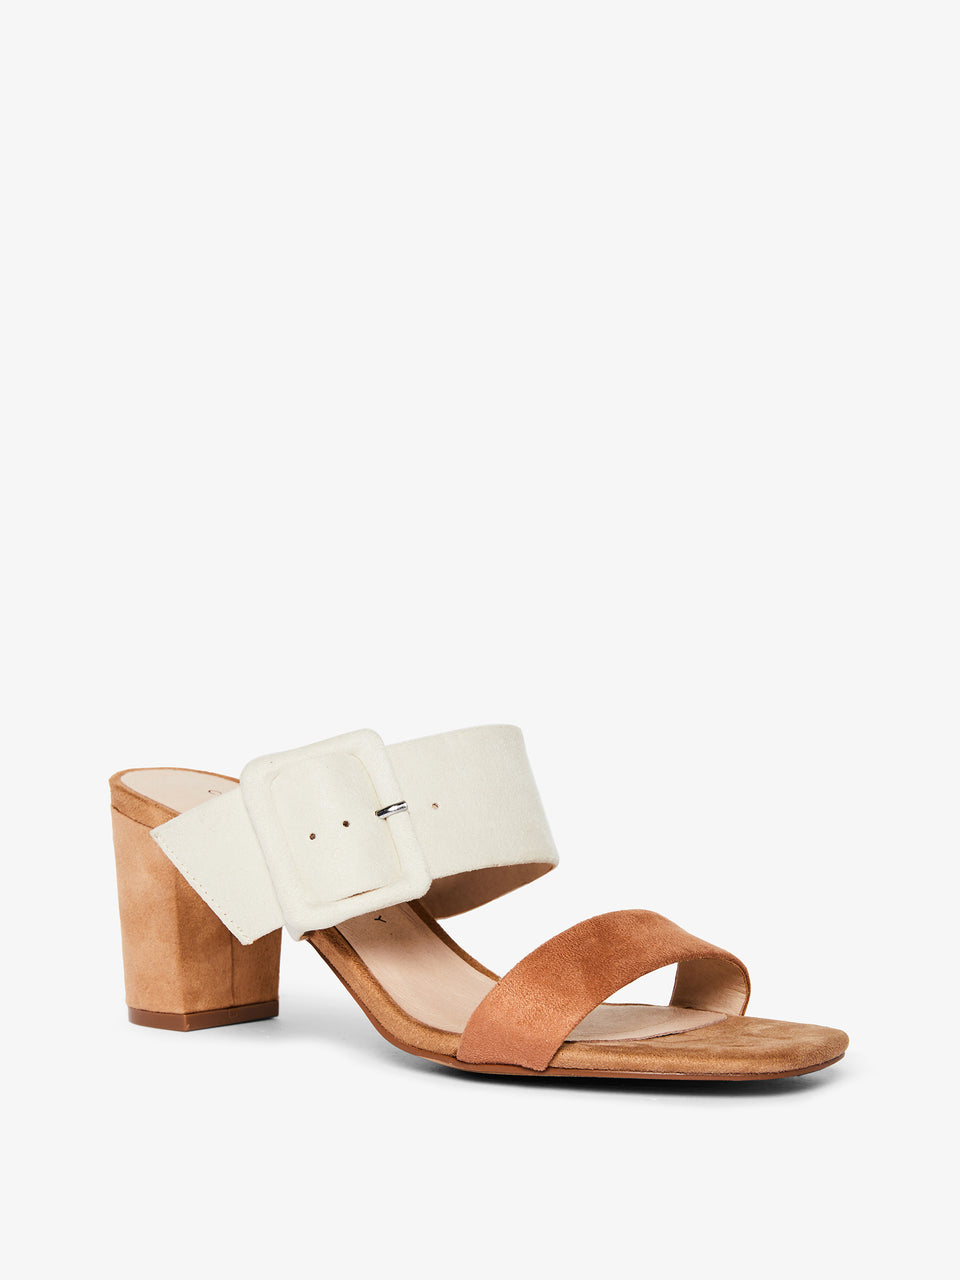 chinese_laundry_yippy_suede_mule_cream